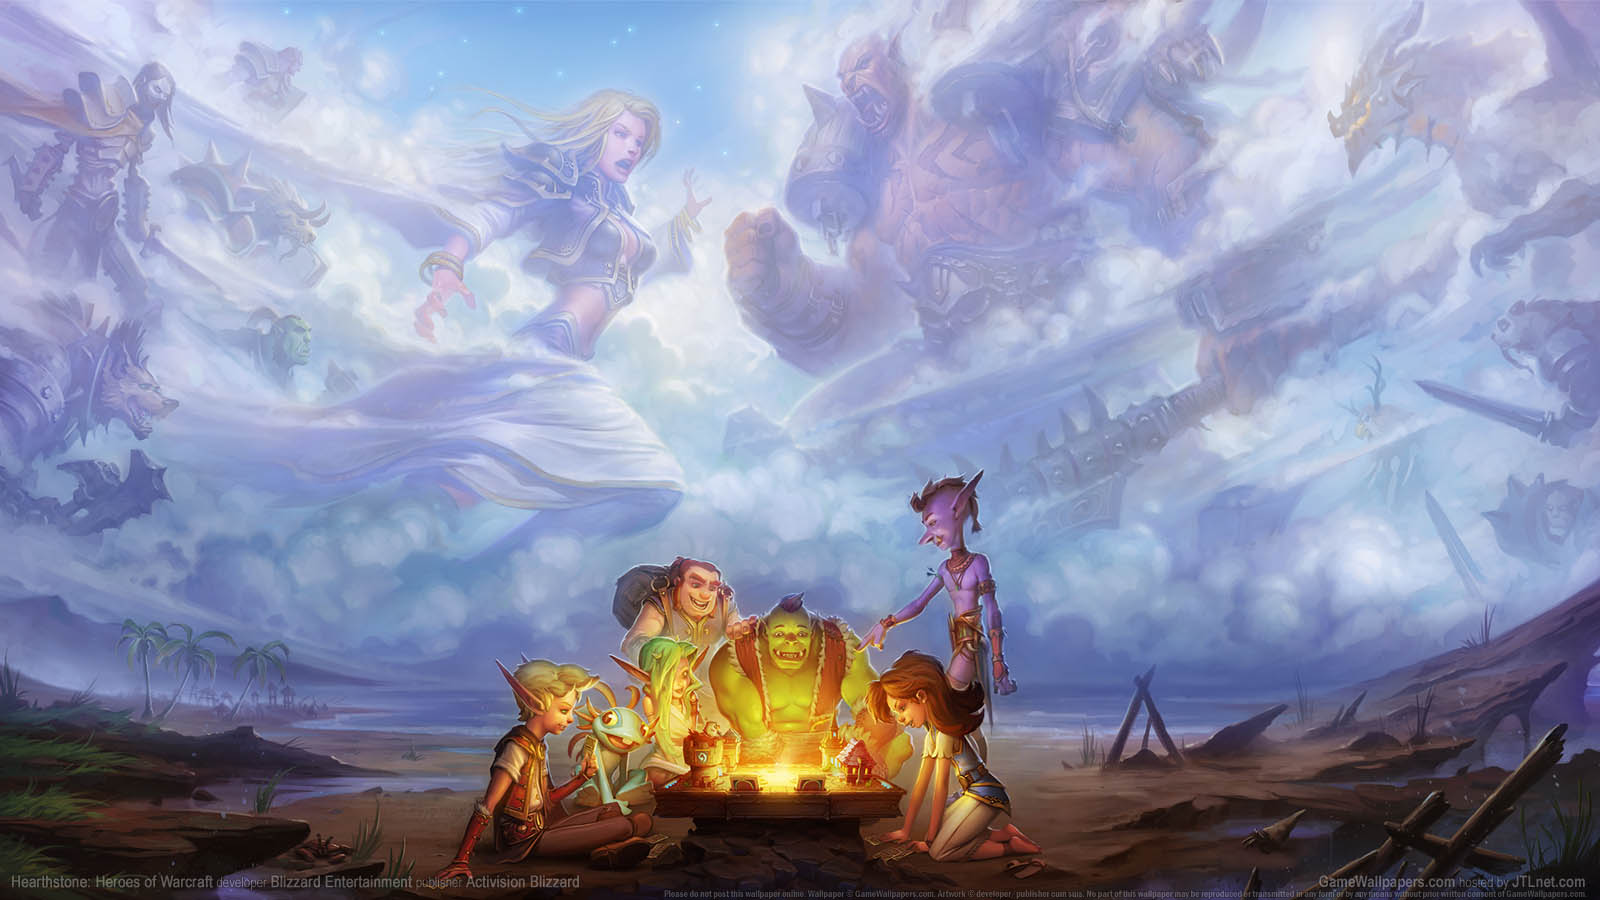 Hearthstone%3A Heroes of Warcraft wallpaper 09 1600x900